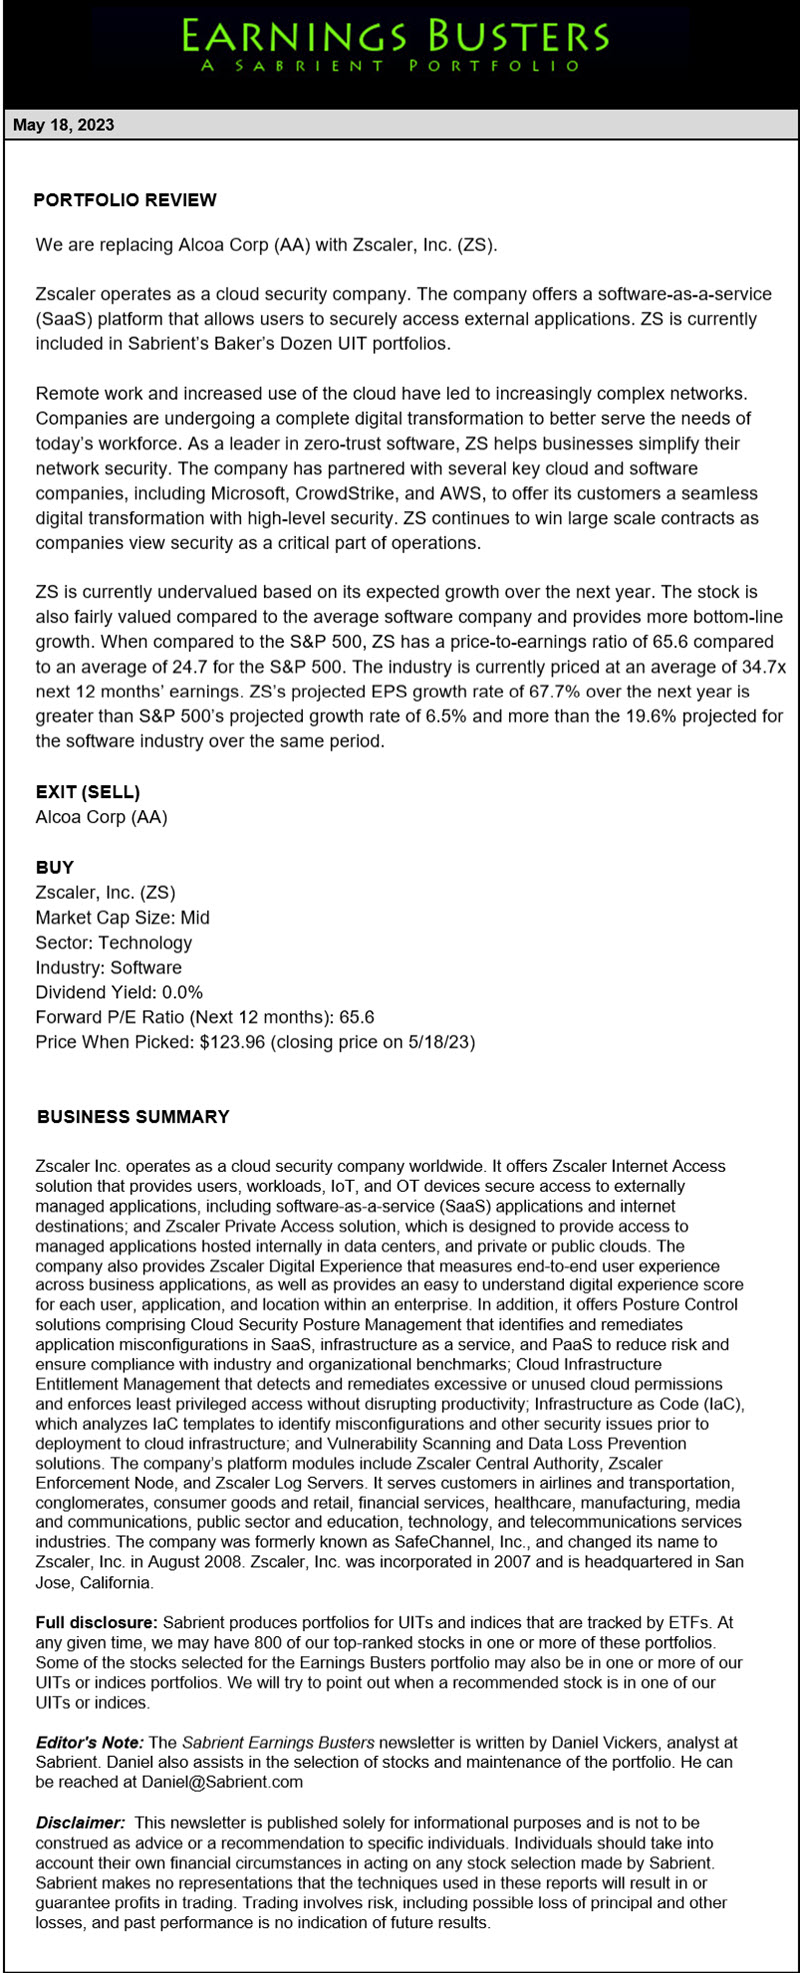 Earnings Busters Newsletter - May 18, 2023